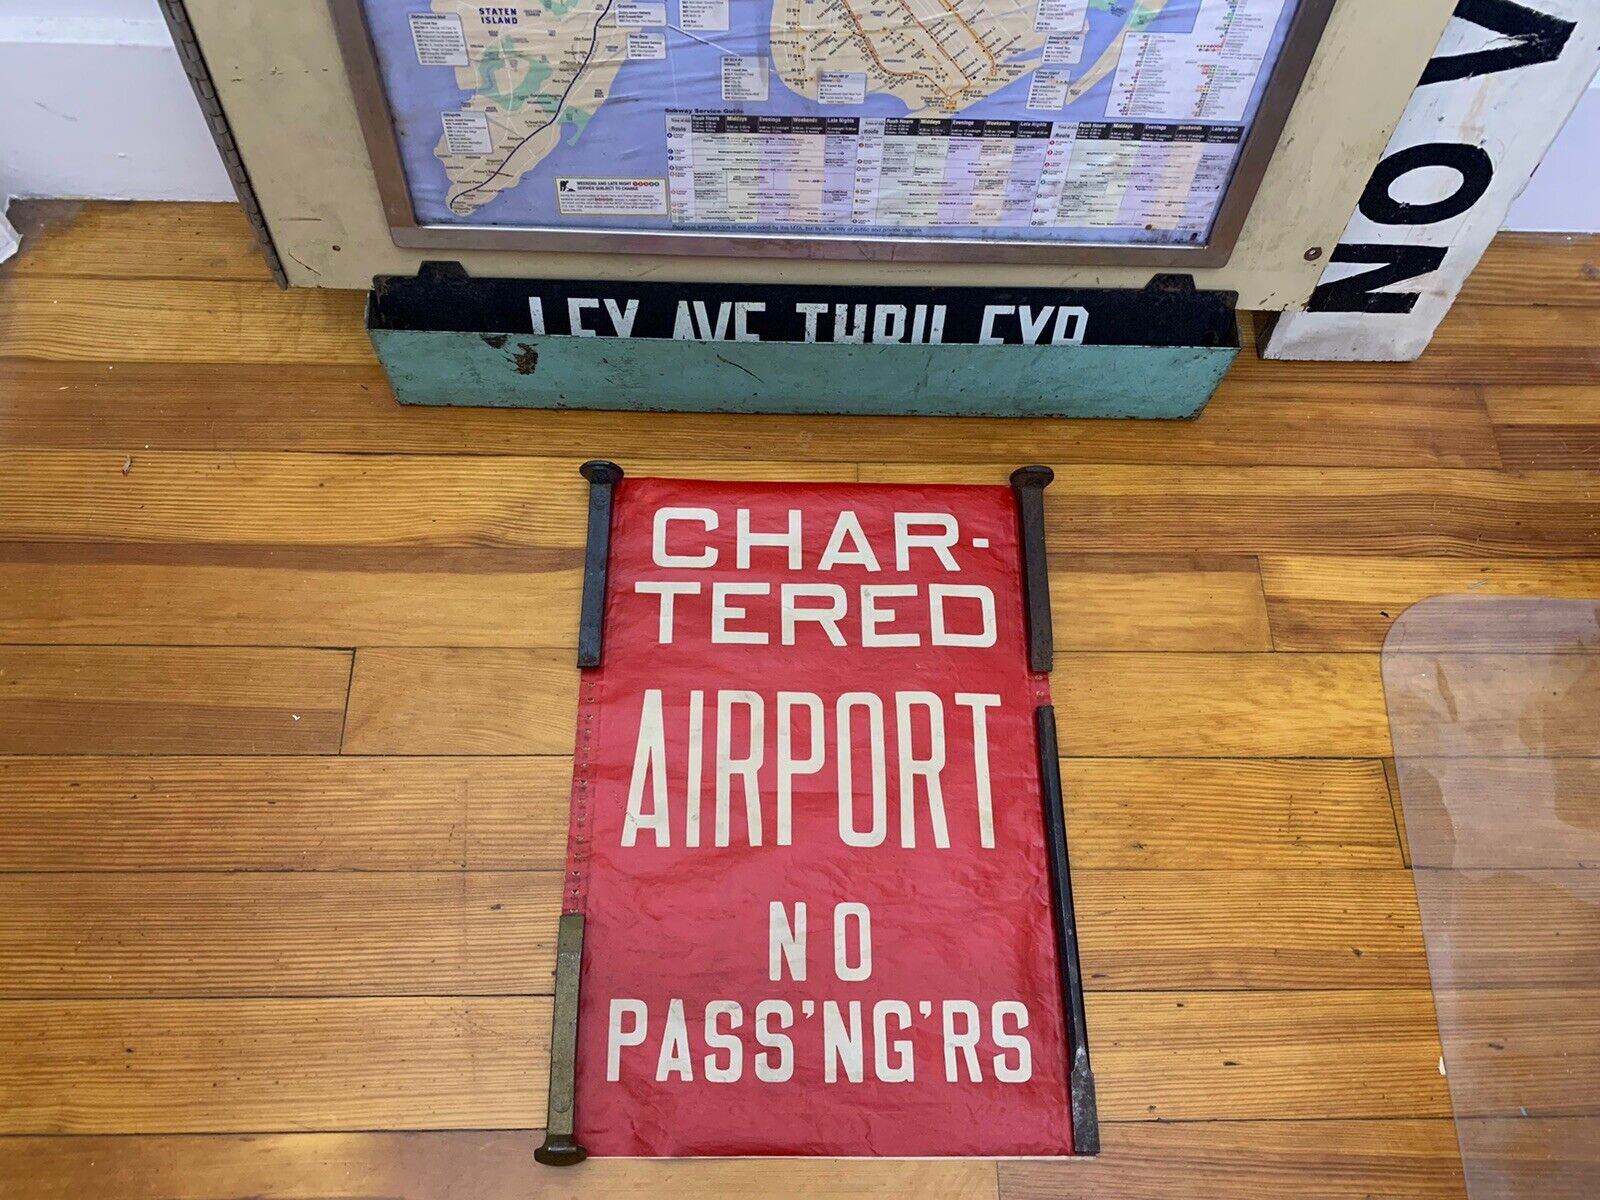 VINTAGE NY NYC BUS ROLL SIGN COLLECTIBLE AIRPORT CHARTERED NO PASSENGERS SERVICE